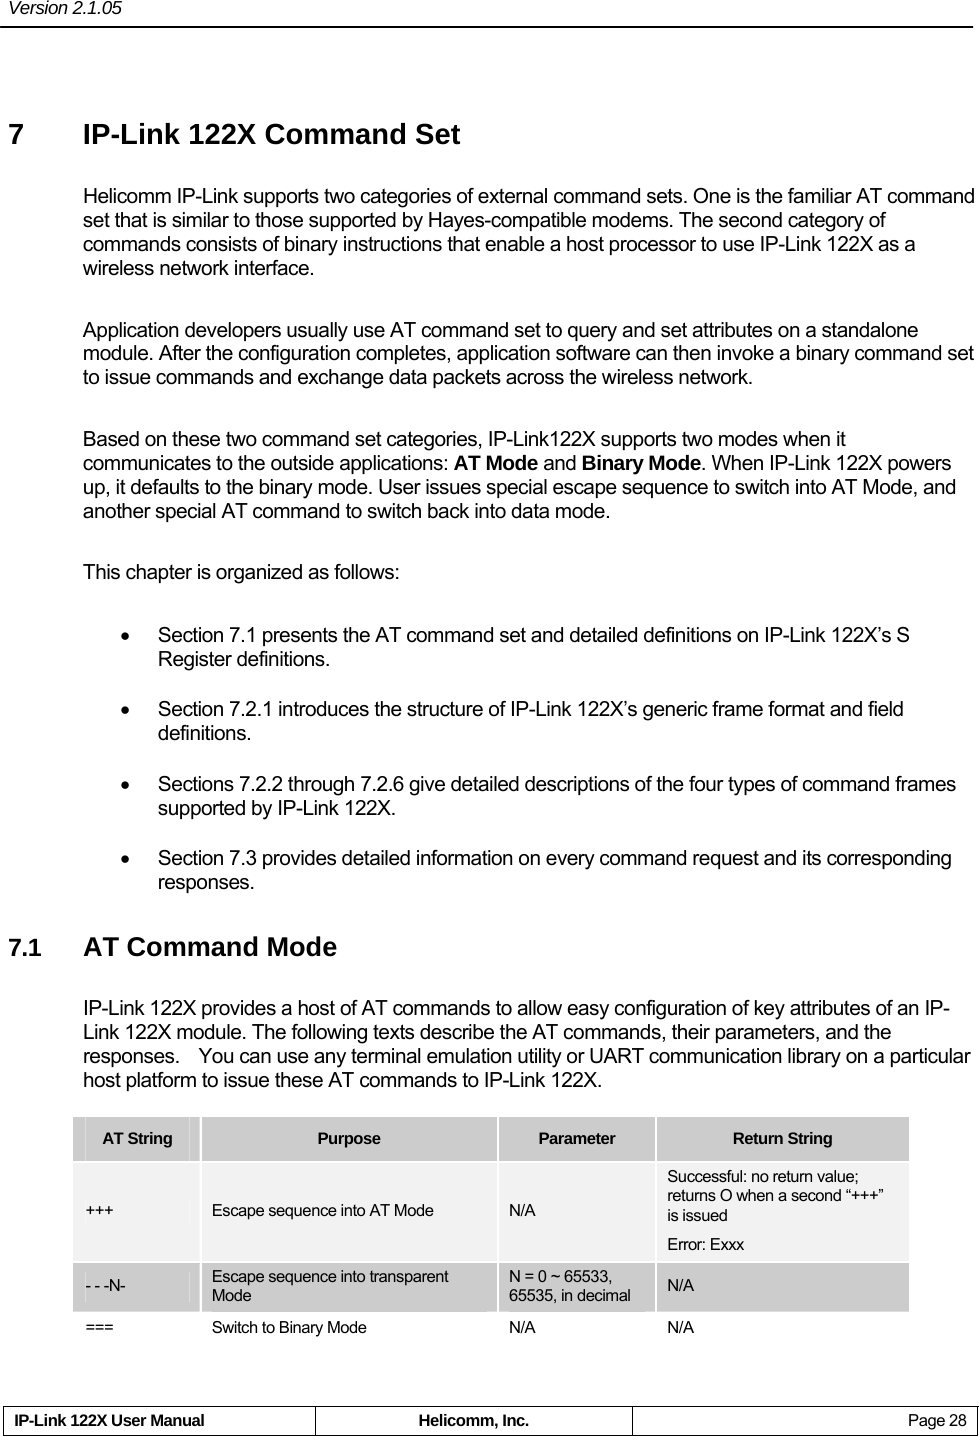 Version 2.1.05     IP-Link 122X User Manual  Helicomm, Inc.  Page 28 7  IP-Link 122X Command Set Helicomm IP-Link supports two categories of external command sets. One is the familiar AT command set that is similar to those supported by Hayes-compatible modems. The second category of commands consists of binary instructions that enable a host processor to use IP-Link 122X as a wireless network interface. Application developers usually use AT command set to query and set attributes on a standalone module. After the configuration completes, application software can then invoke a binary command set to issue commands and exchange data packets across the wireless network. Based on these two command set categories, IP-Link122X supports two modes when it communicates to the outside applications: AT Mode and Binary Mode. When IP-Link 122X powers up, it defaults to the binary mode. User issues special escape sequence to switch into AT Mode, and another special AT command to switch back into data mode. This chapter is organized as follows:     •  Section 7.1 presents the AT command set and detailed definitions on IP-Link 122X’s S Register definitions.   •  Section 7.2.1 introduces the structure of IP-Link 122X’s generic frame format and field definitions.  •  Sections 7.2.2 through 7.2.6 give detailed descriptions of the four types of command frames supported by IP-Link 122X.     •  Section 7.3 provides detailed information on every command request and its corresponding responses. 7.1  AT Command Mode IP-Link 122X provides a host of AT commands to allow easy configuration of key attributes of an IP-Link 122X module. The following texts describe the AT commands, their parameters, and the responses.  You can use any terminal emulation utility or UART communication library on a particular host platform to issue these AT commands to IP-Link 122X.   AT String  Purpose  Parameter  Return String +++  Escape sequence into AT Mode  N/A Successful: no return value; returns O when a second “+++” is issued Error: Exxx - - -N-  Escape sequence into transparent Mode N = 0 ~ 65533,   65535, in decimal  N/A ===  Switch to Binary Mode  N/A  N/A 